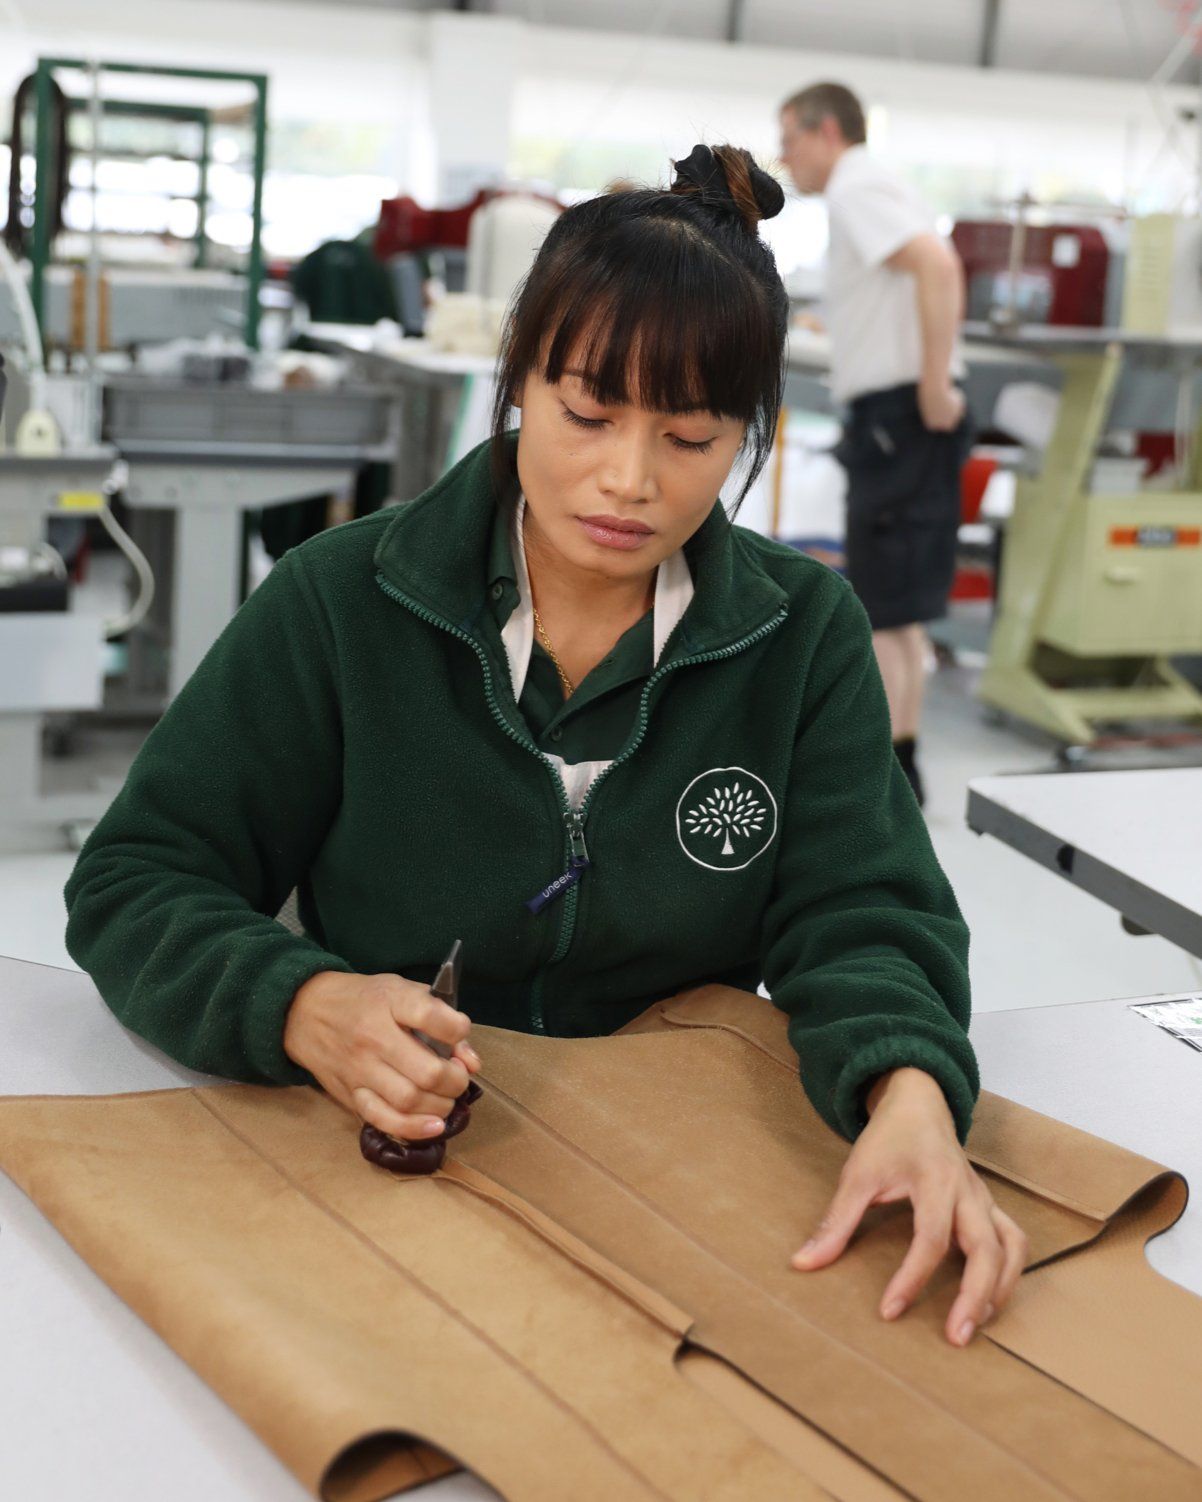 Mulberry employee stitching in the factory